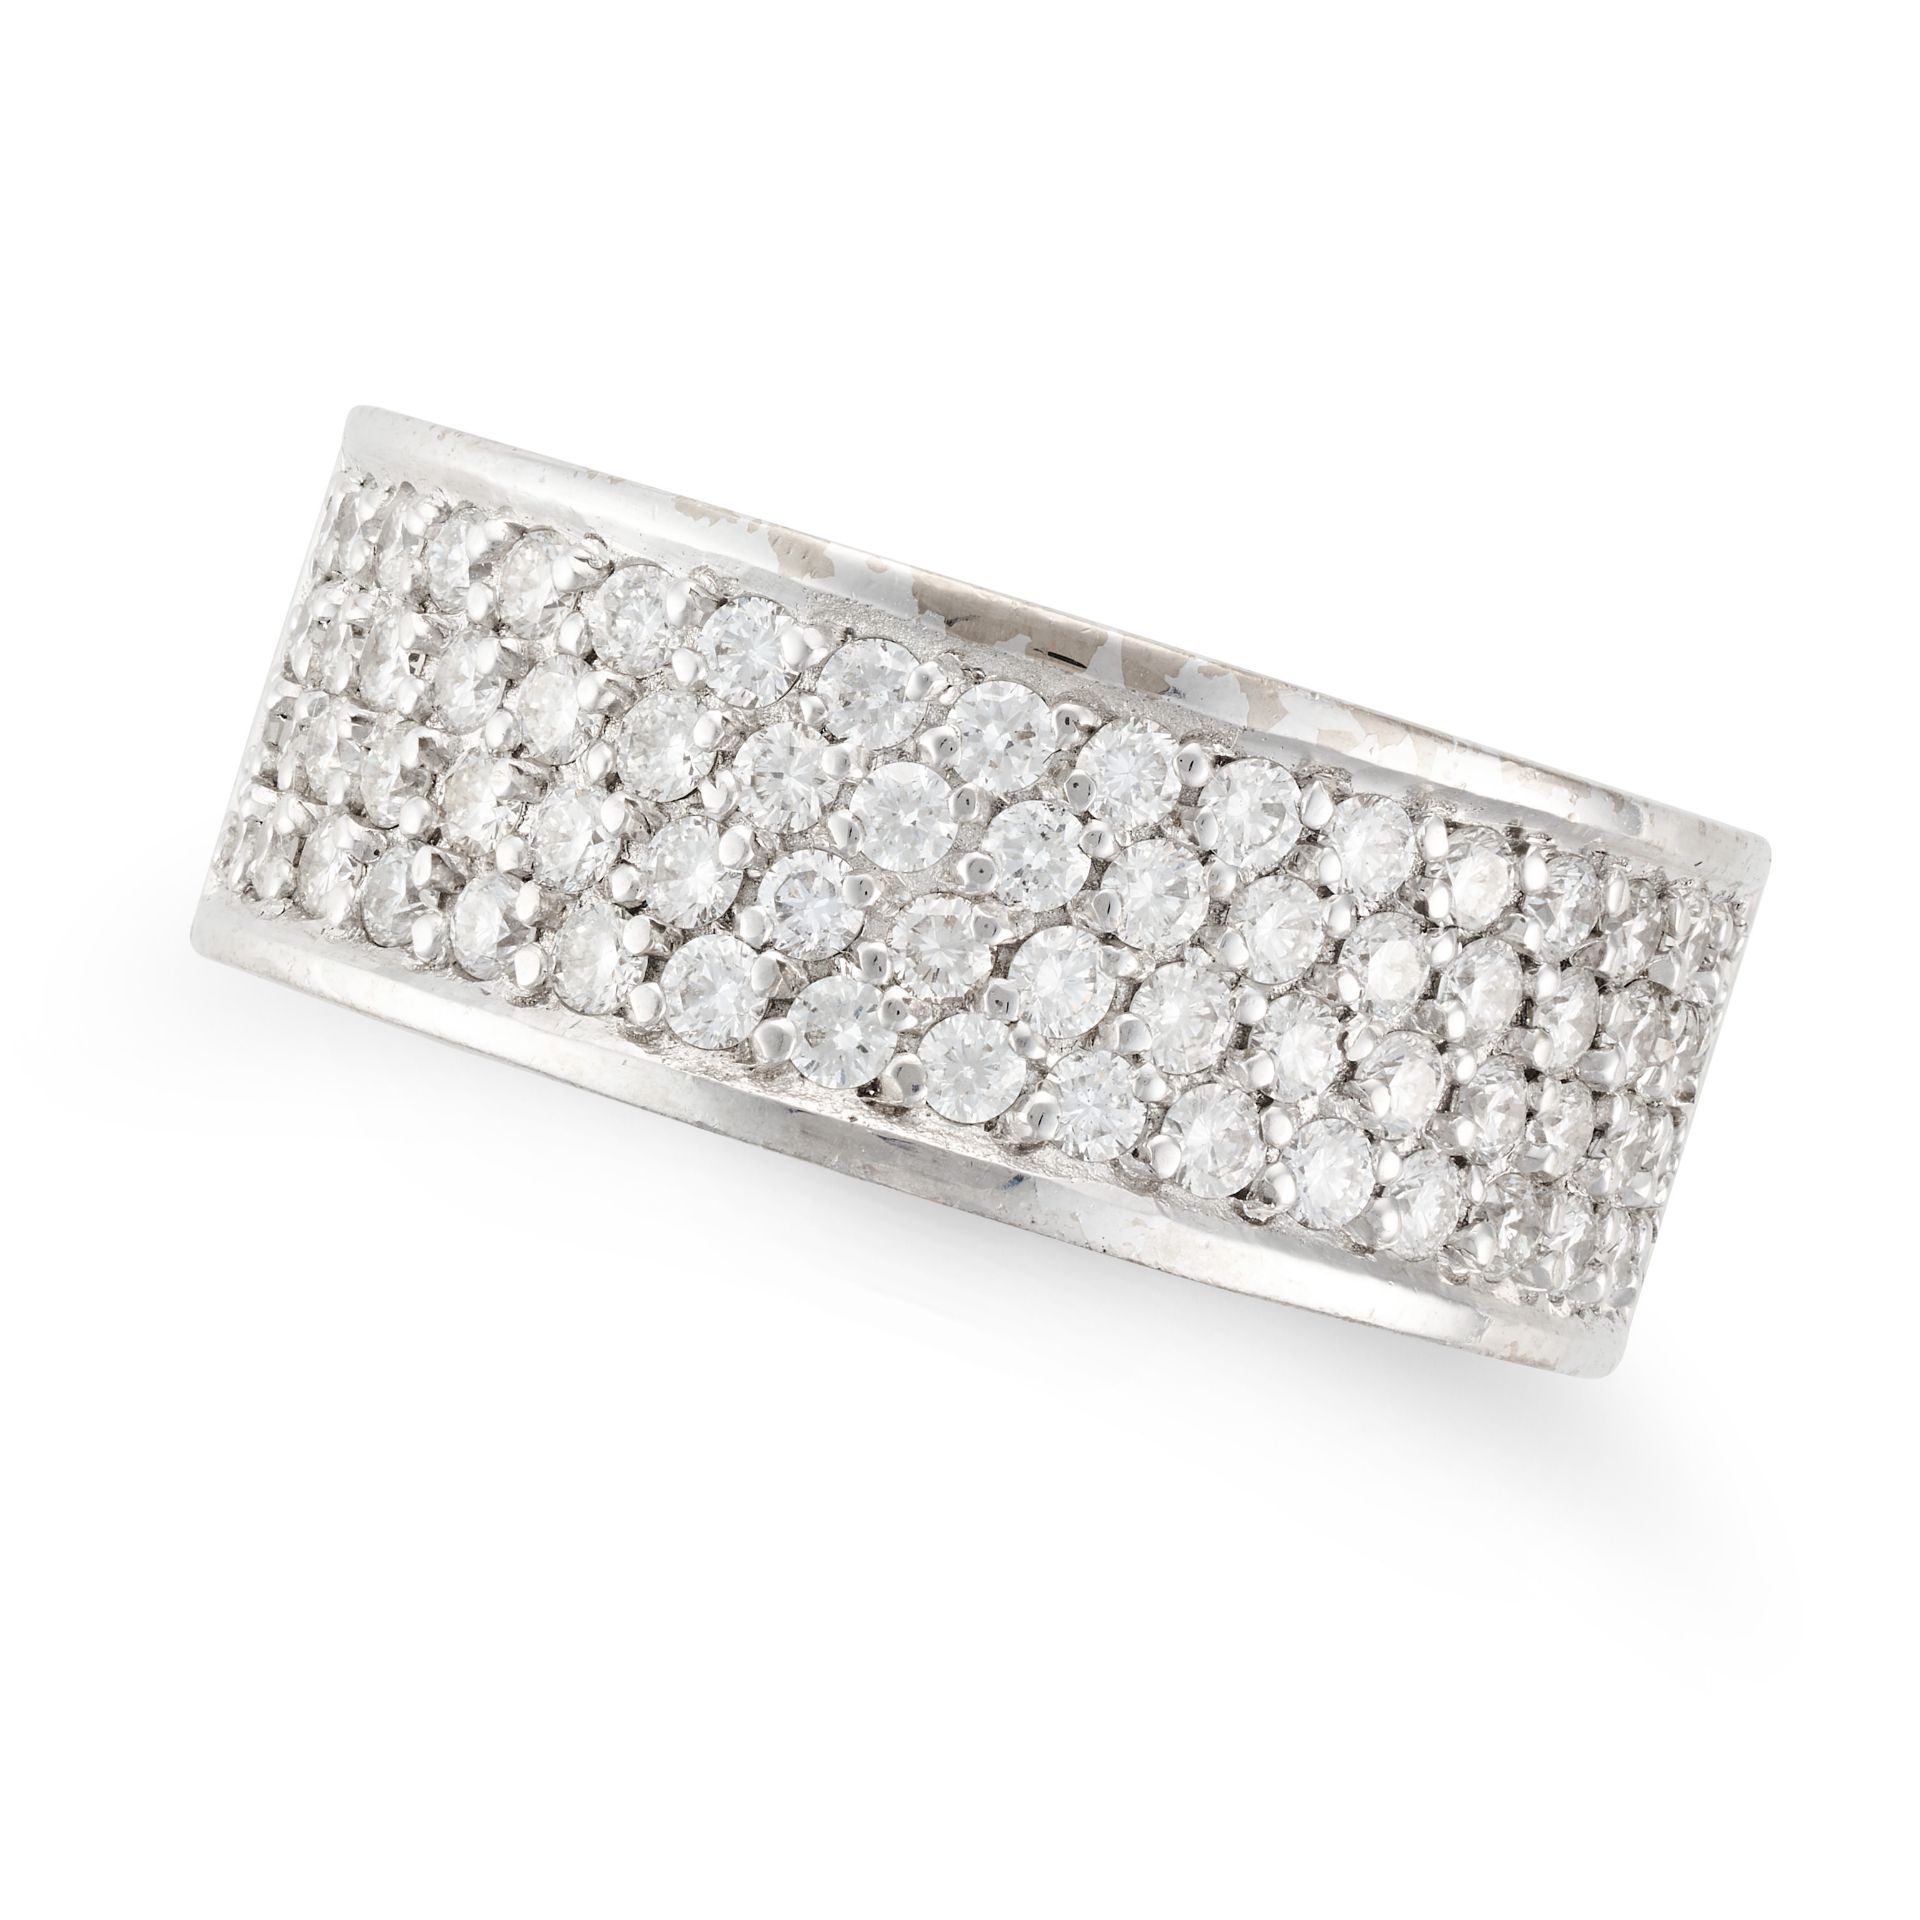 A DIAMOND BAND RING in 18ct white gold, the wide band pave set to one half with round brilliant c...